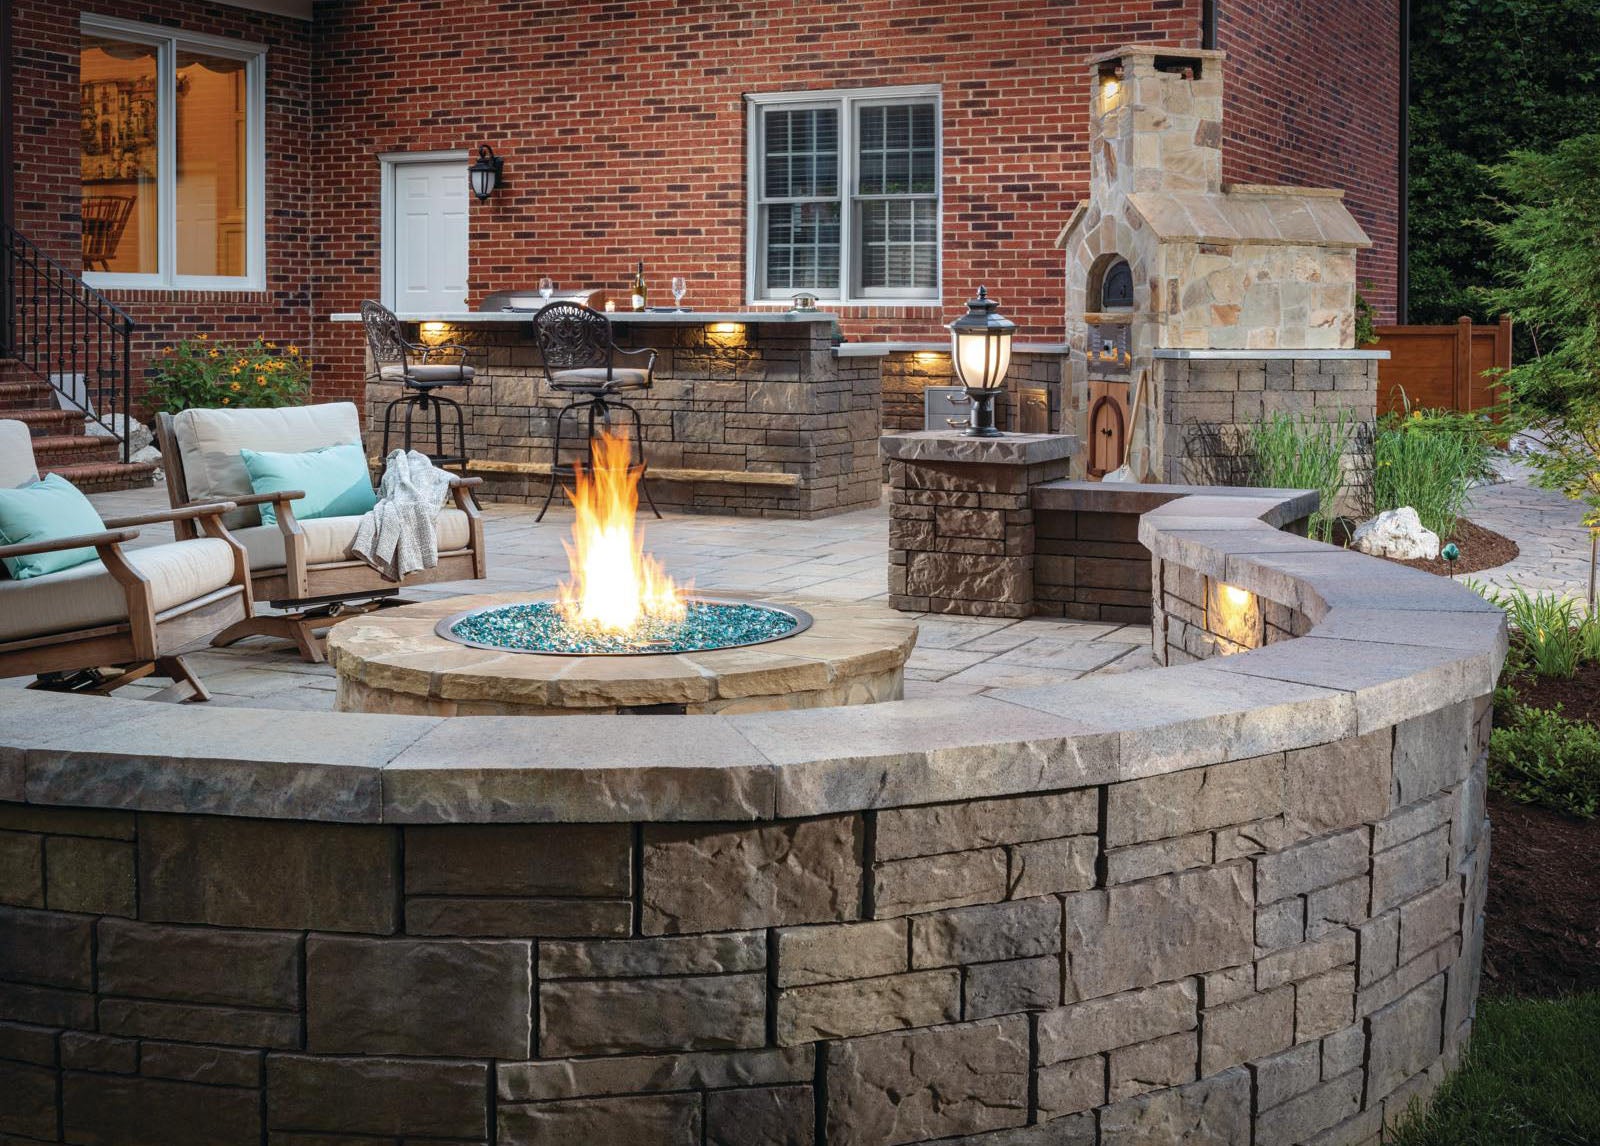 Designing A Patio Around Fire Pit, Are Concrete Pavers Safe For Fire Pit